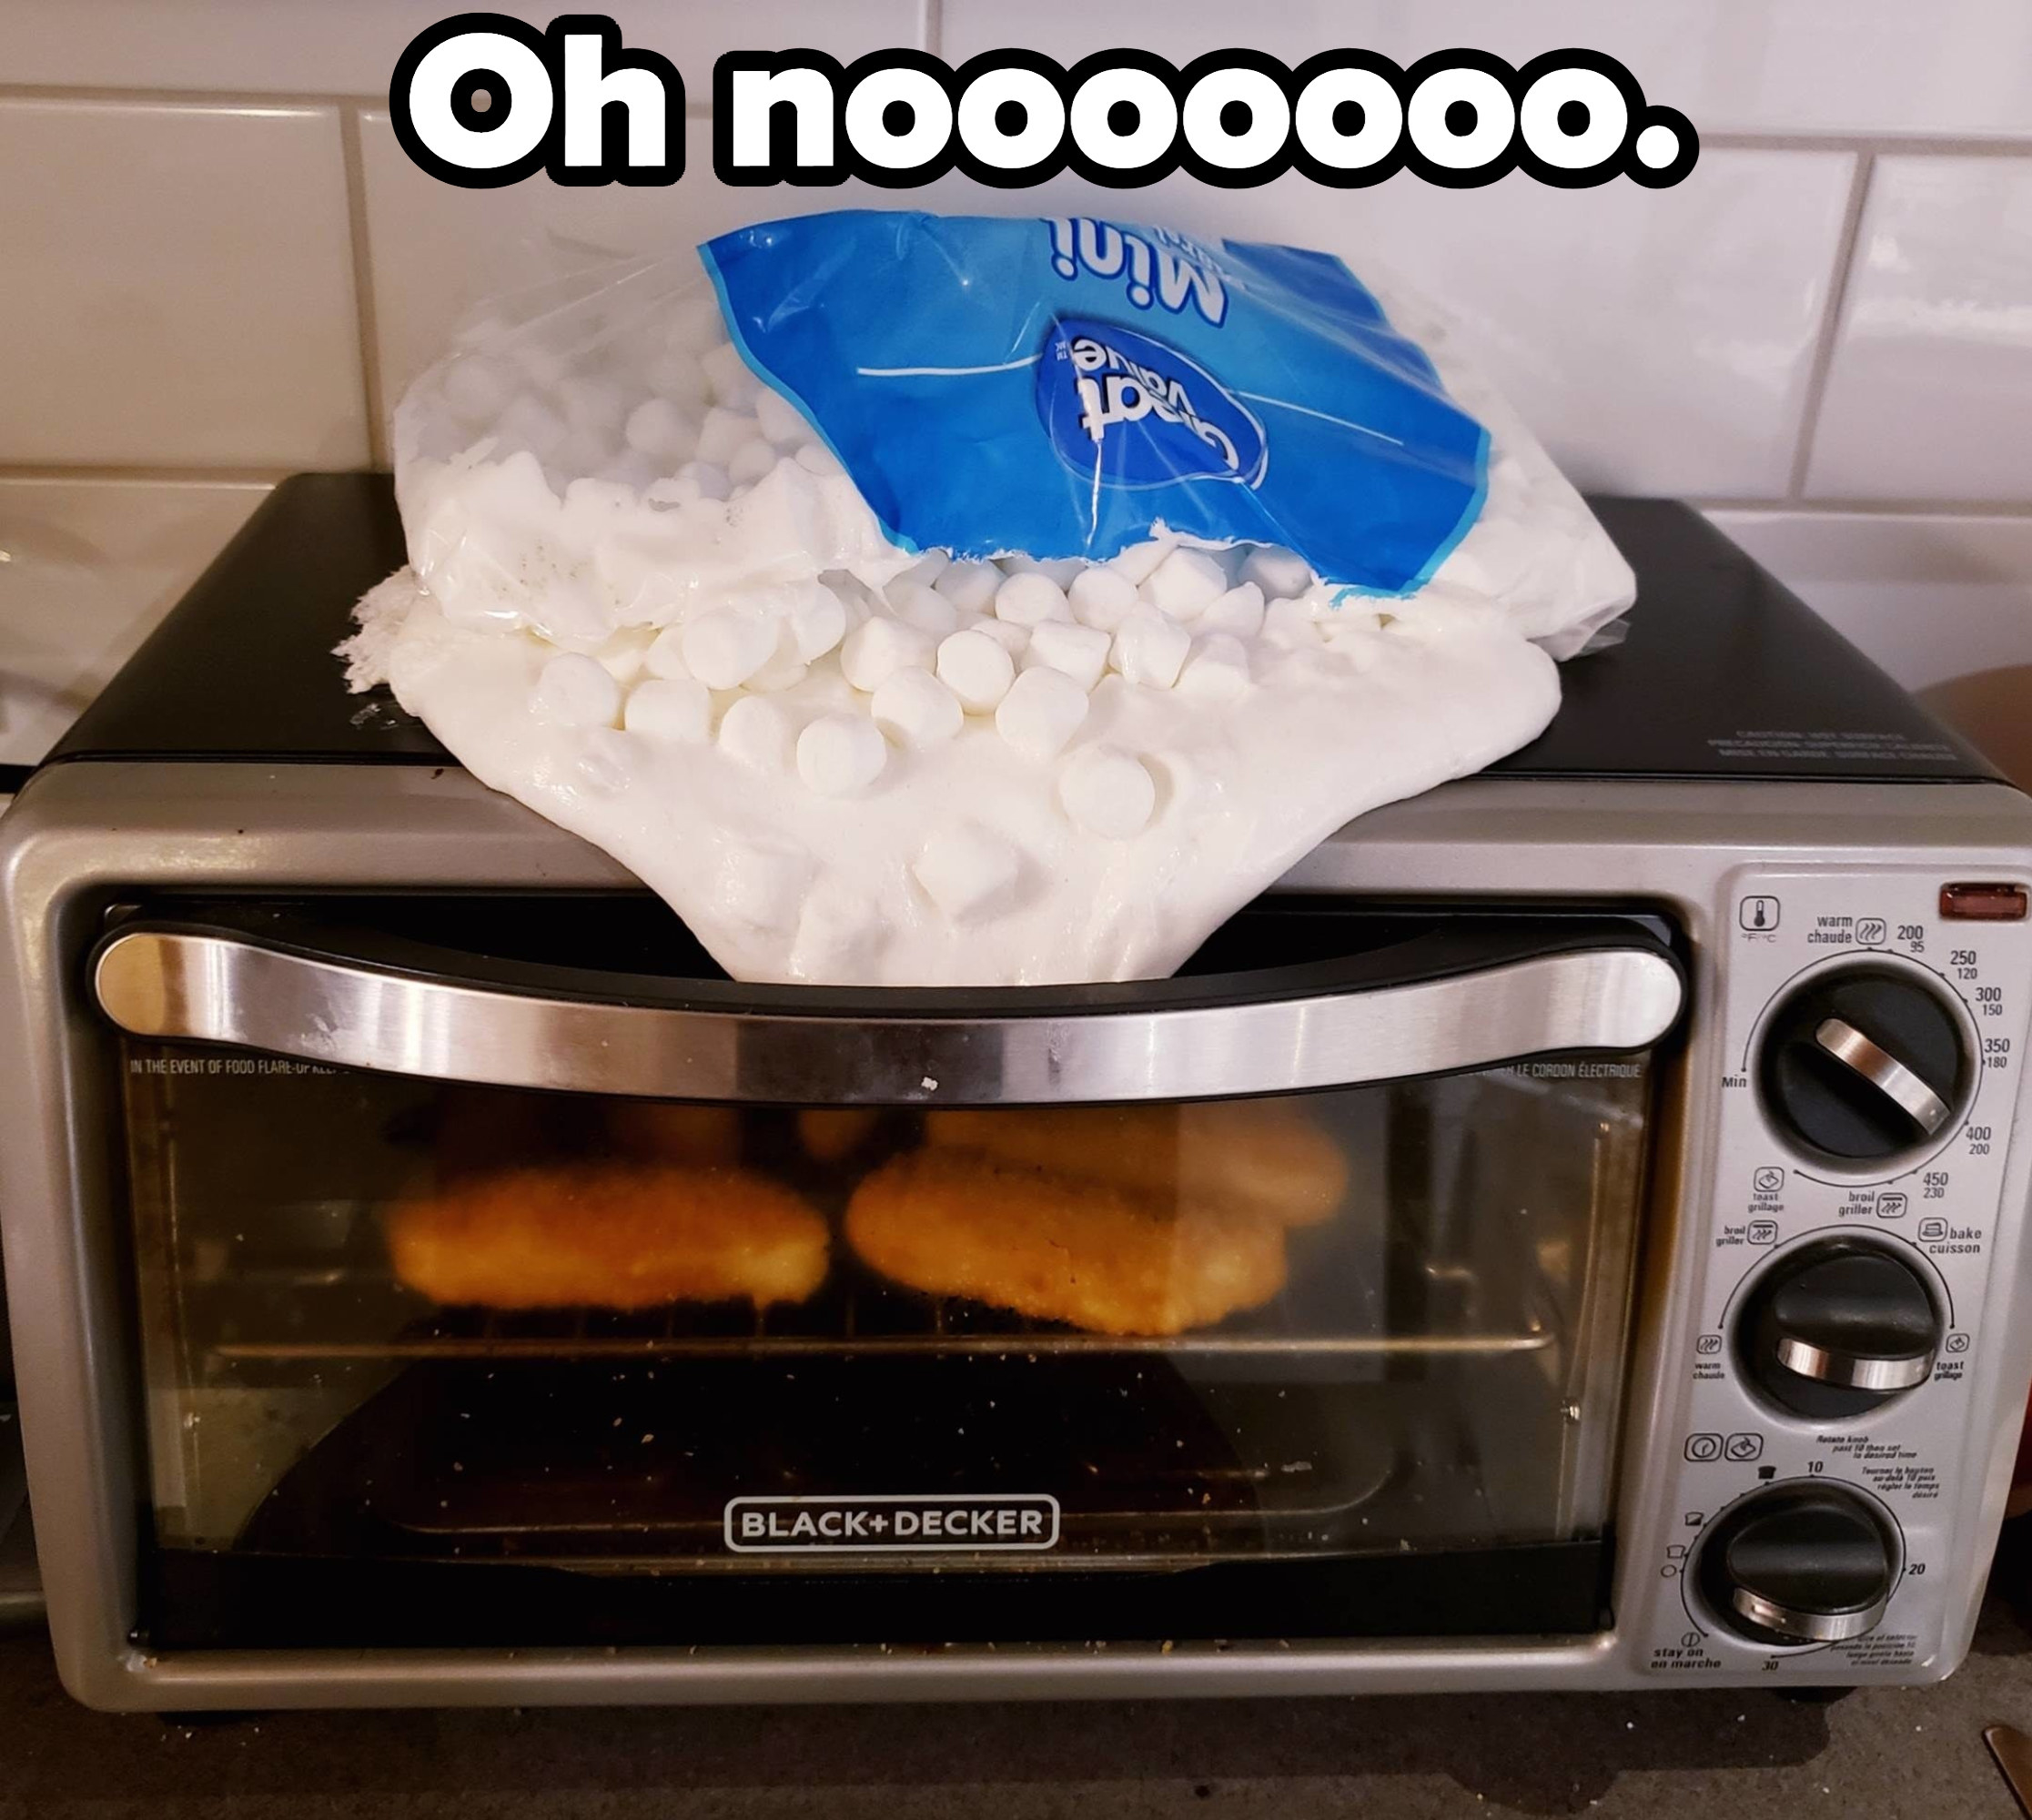 Marshmallows in a bag melted above a toaster oven